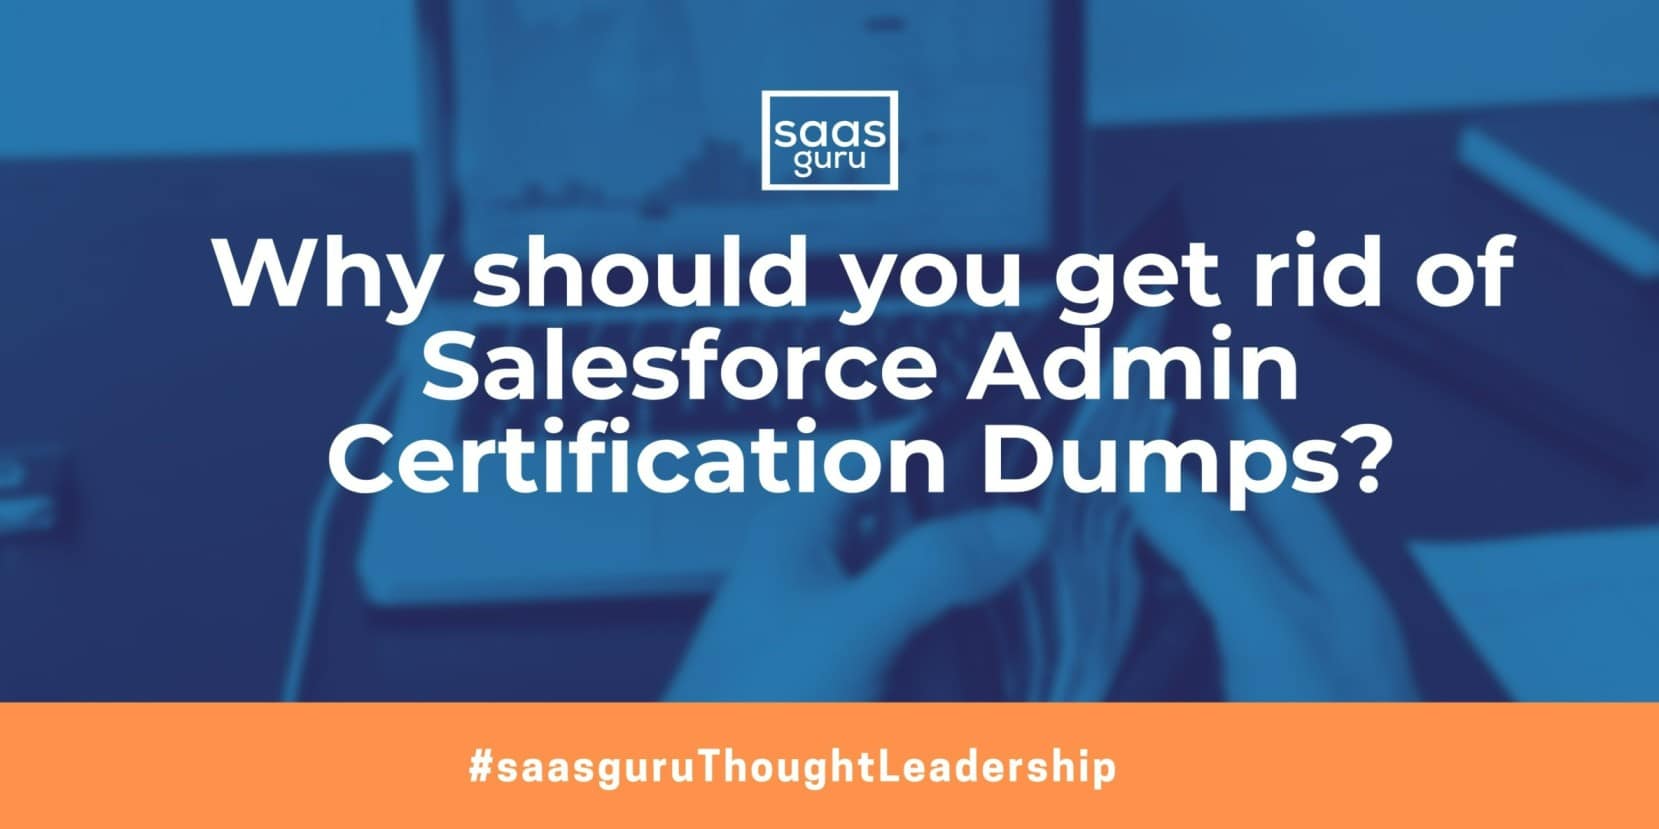 Why should you get rid of Salesforce Admin Certification Dumps?